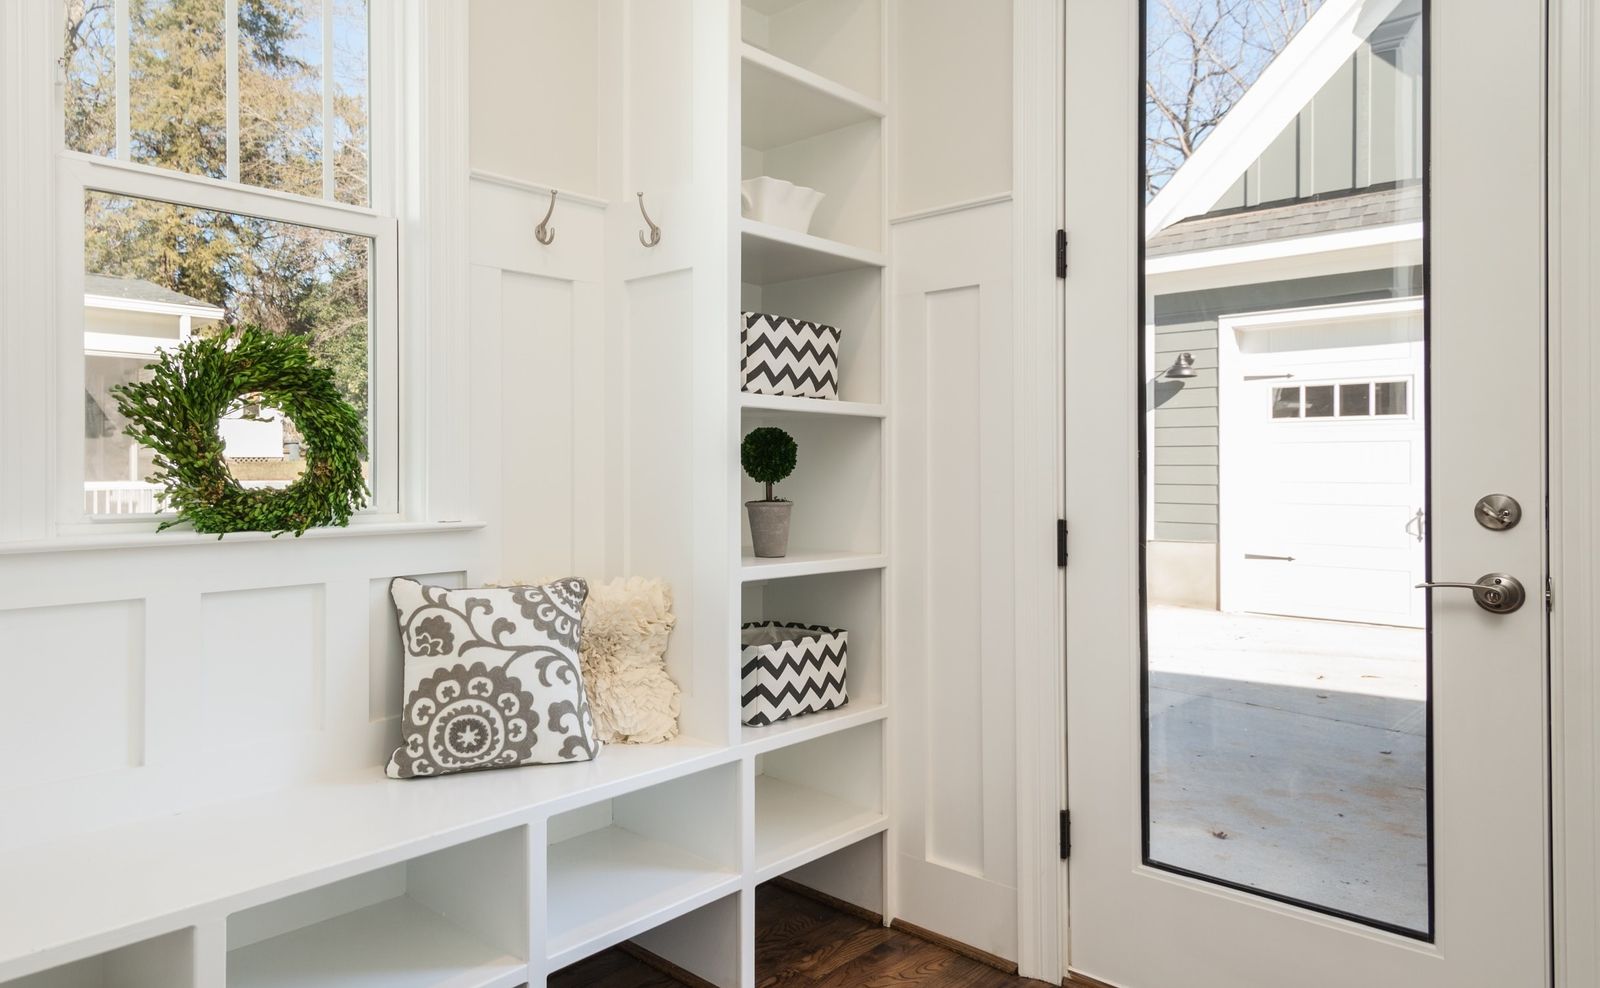 How to Make Storage Space Look More Spacious and Functional